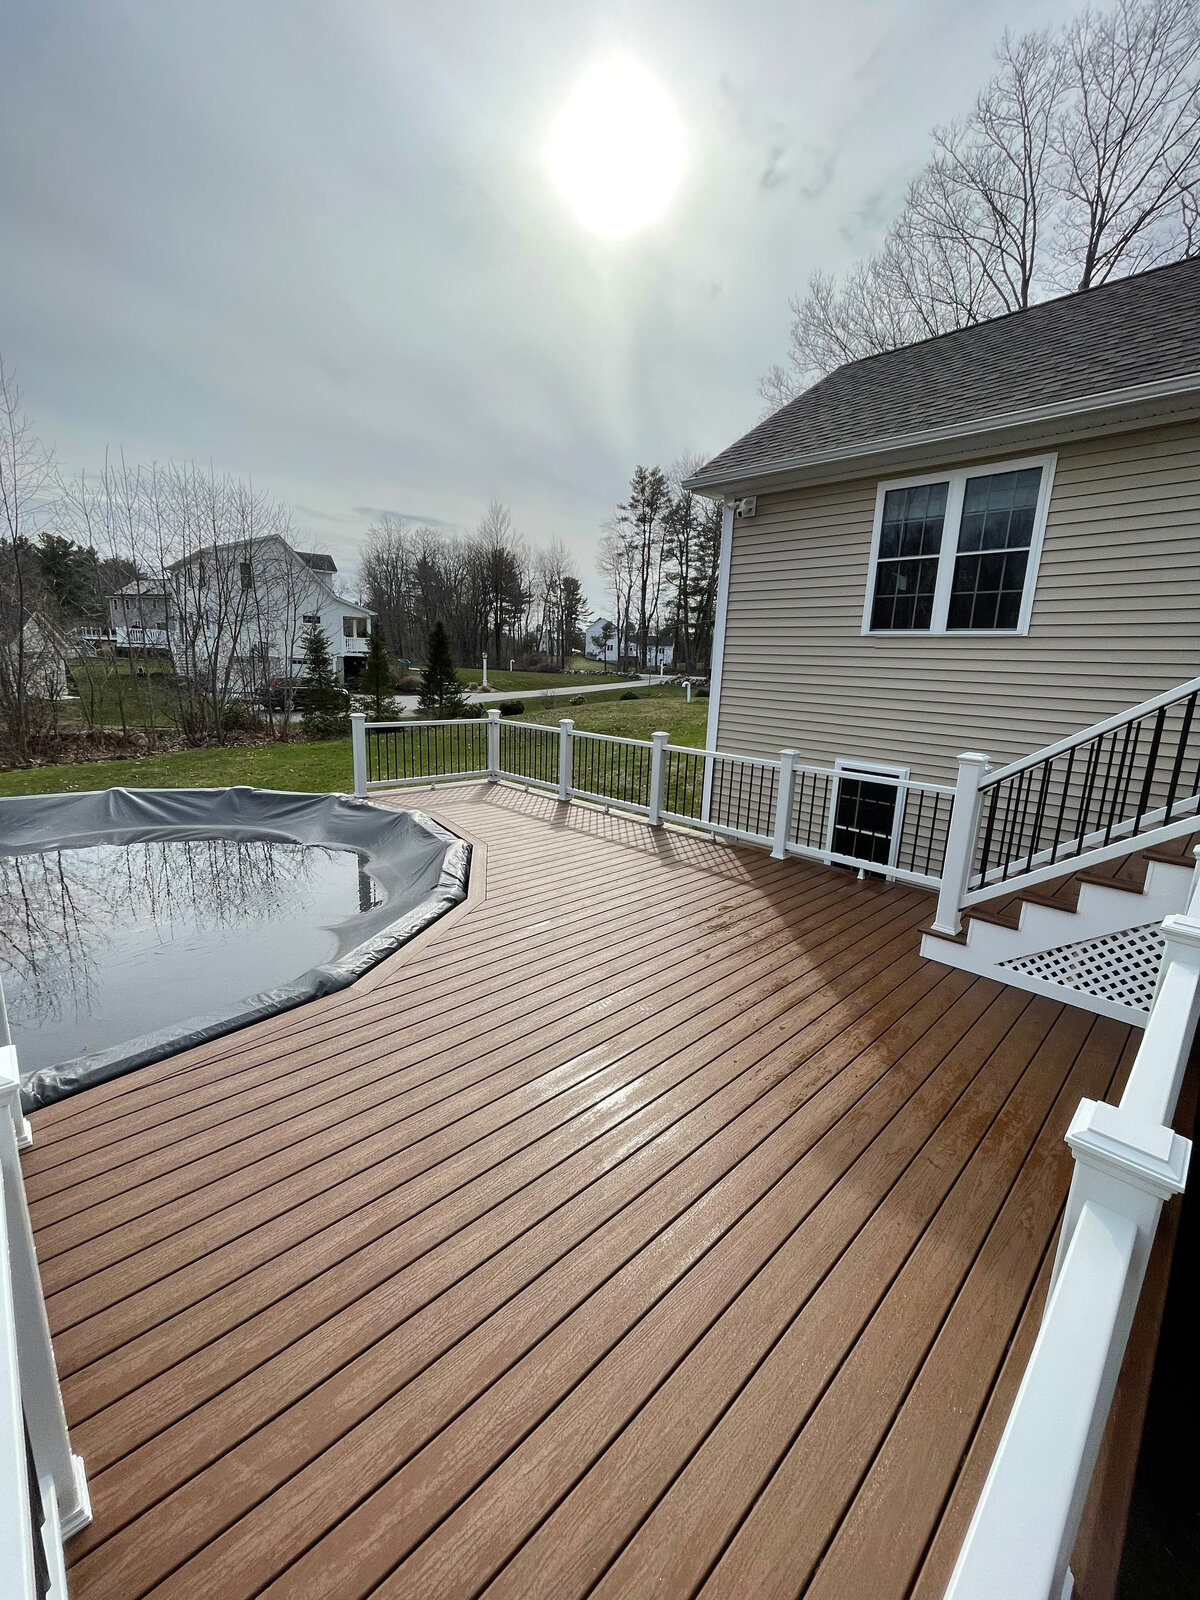 A beautiful dark brown deck with white railings and trellis stairs facing around a pool done by a Marlborough MA Deck Contractor